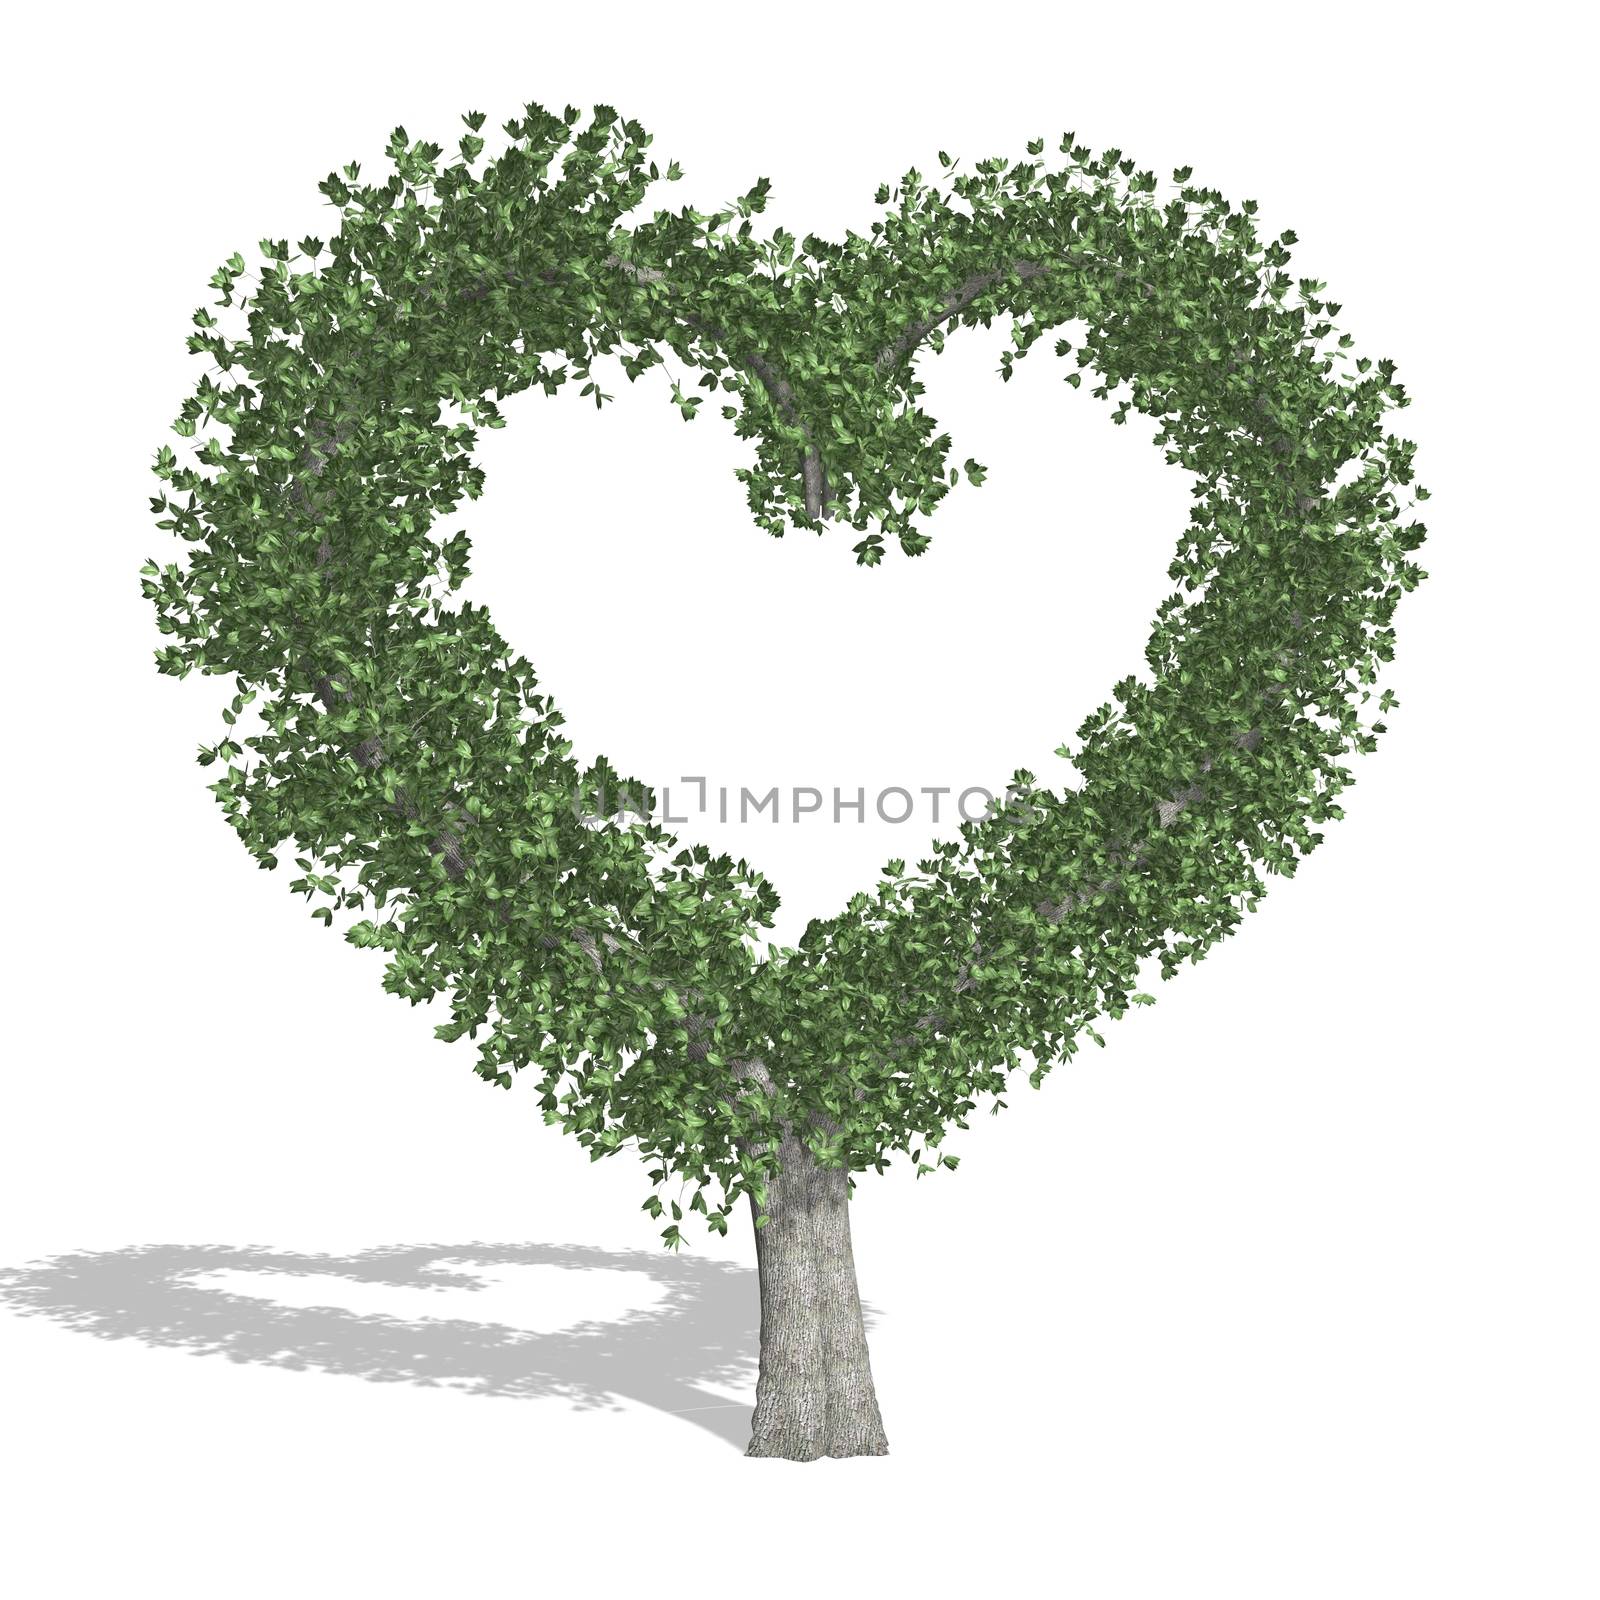 Heart tree, isolated on white background.